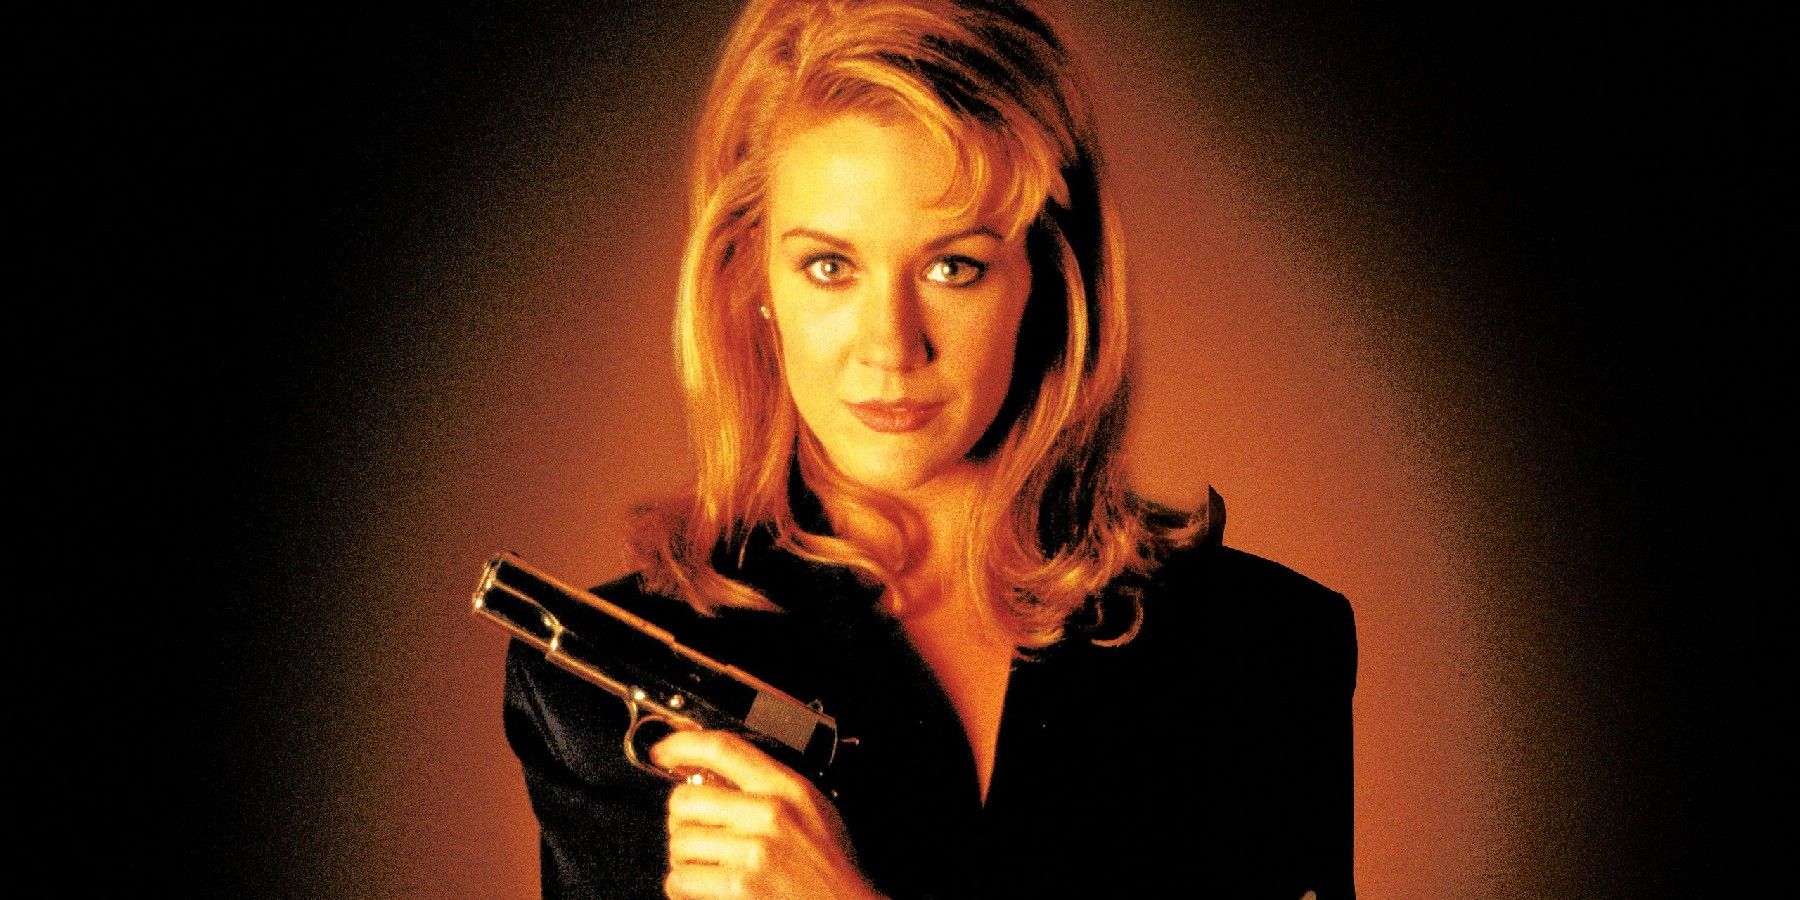 A woman holding a gun in the poster for Excessive Force 2: Force on Force.